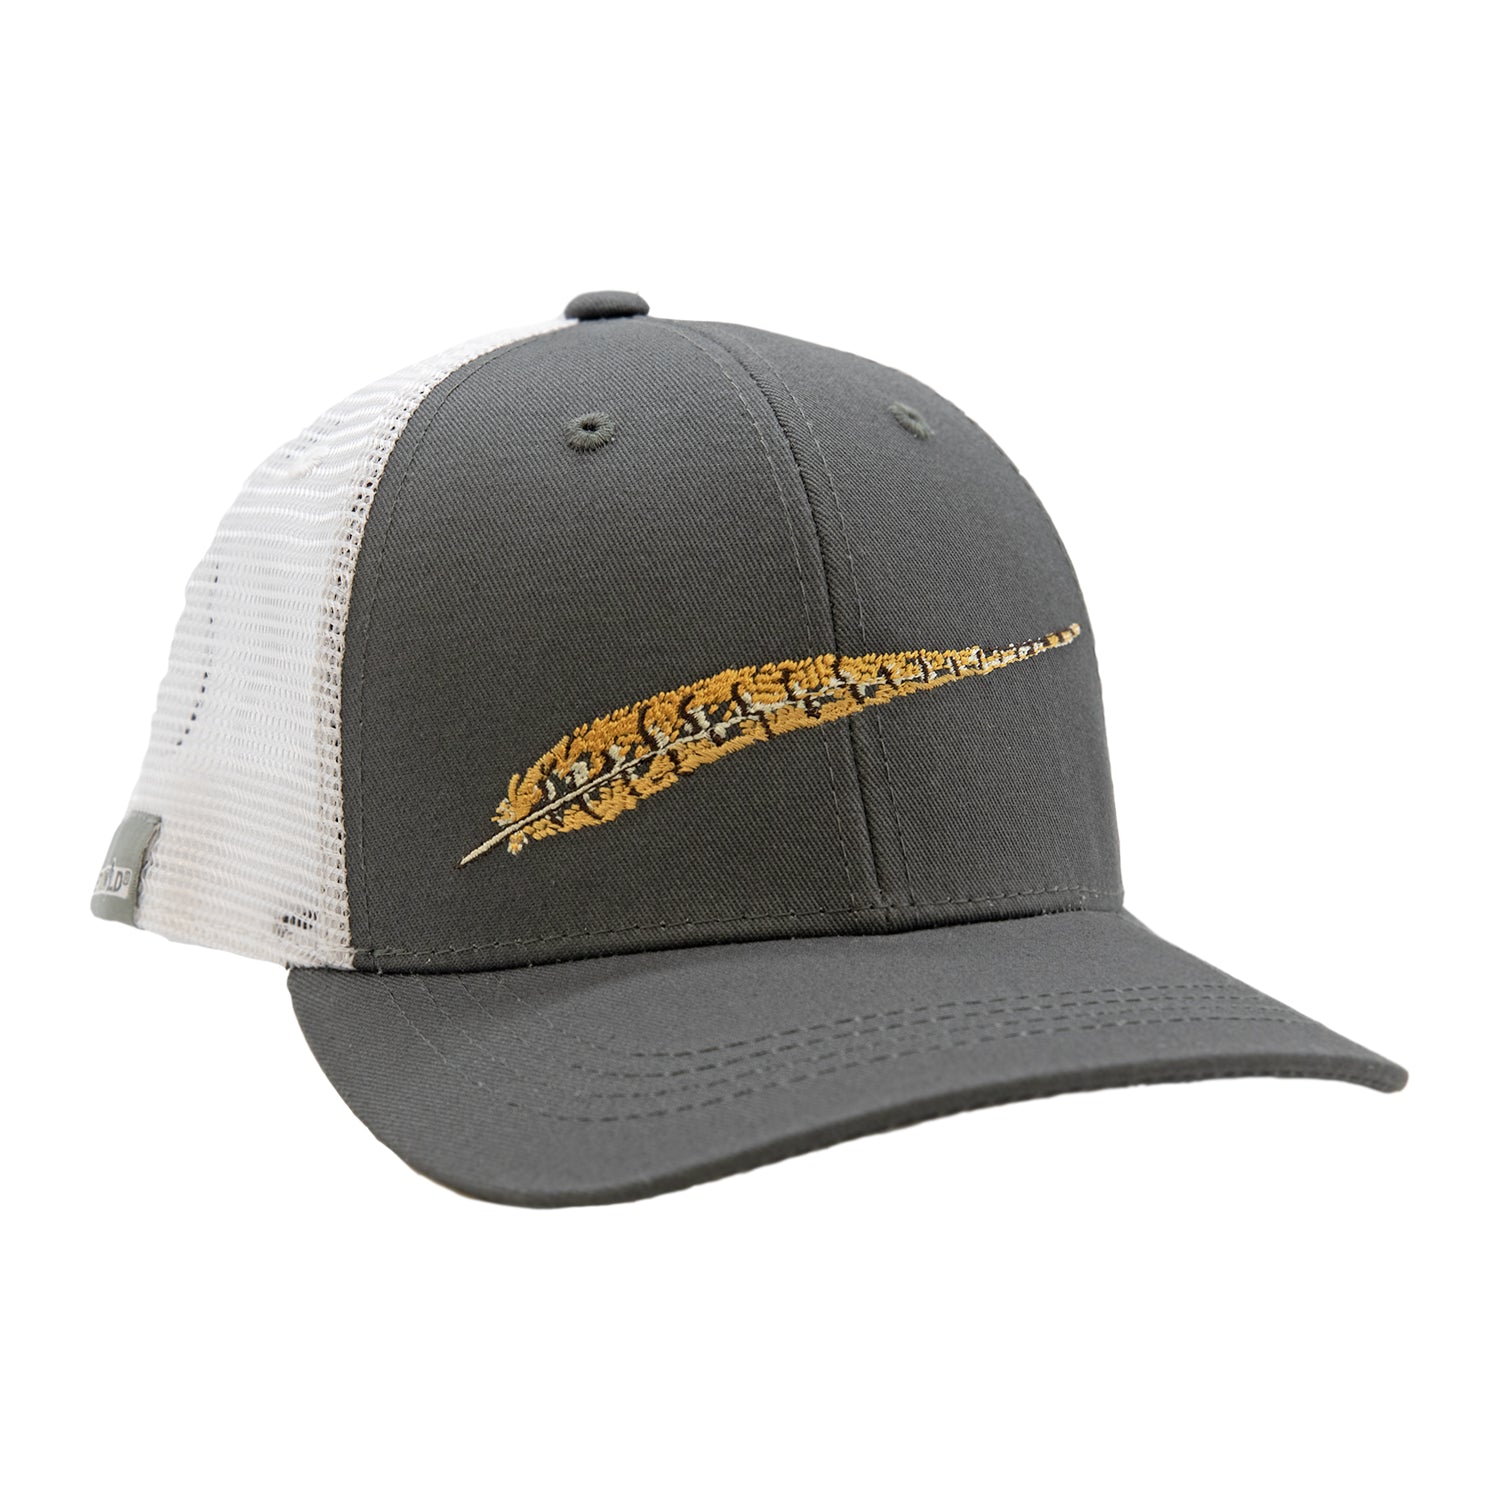 Gray hat with white mesh back with a pheasant tail feather on the front